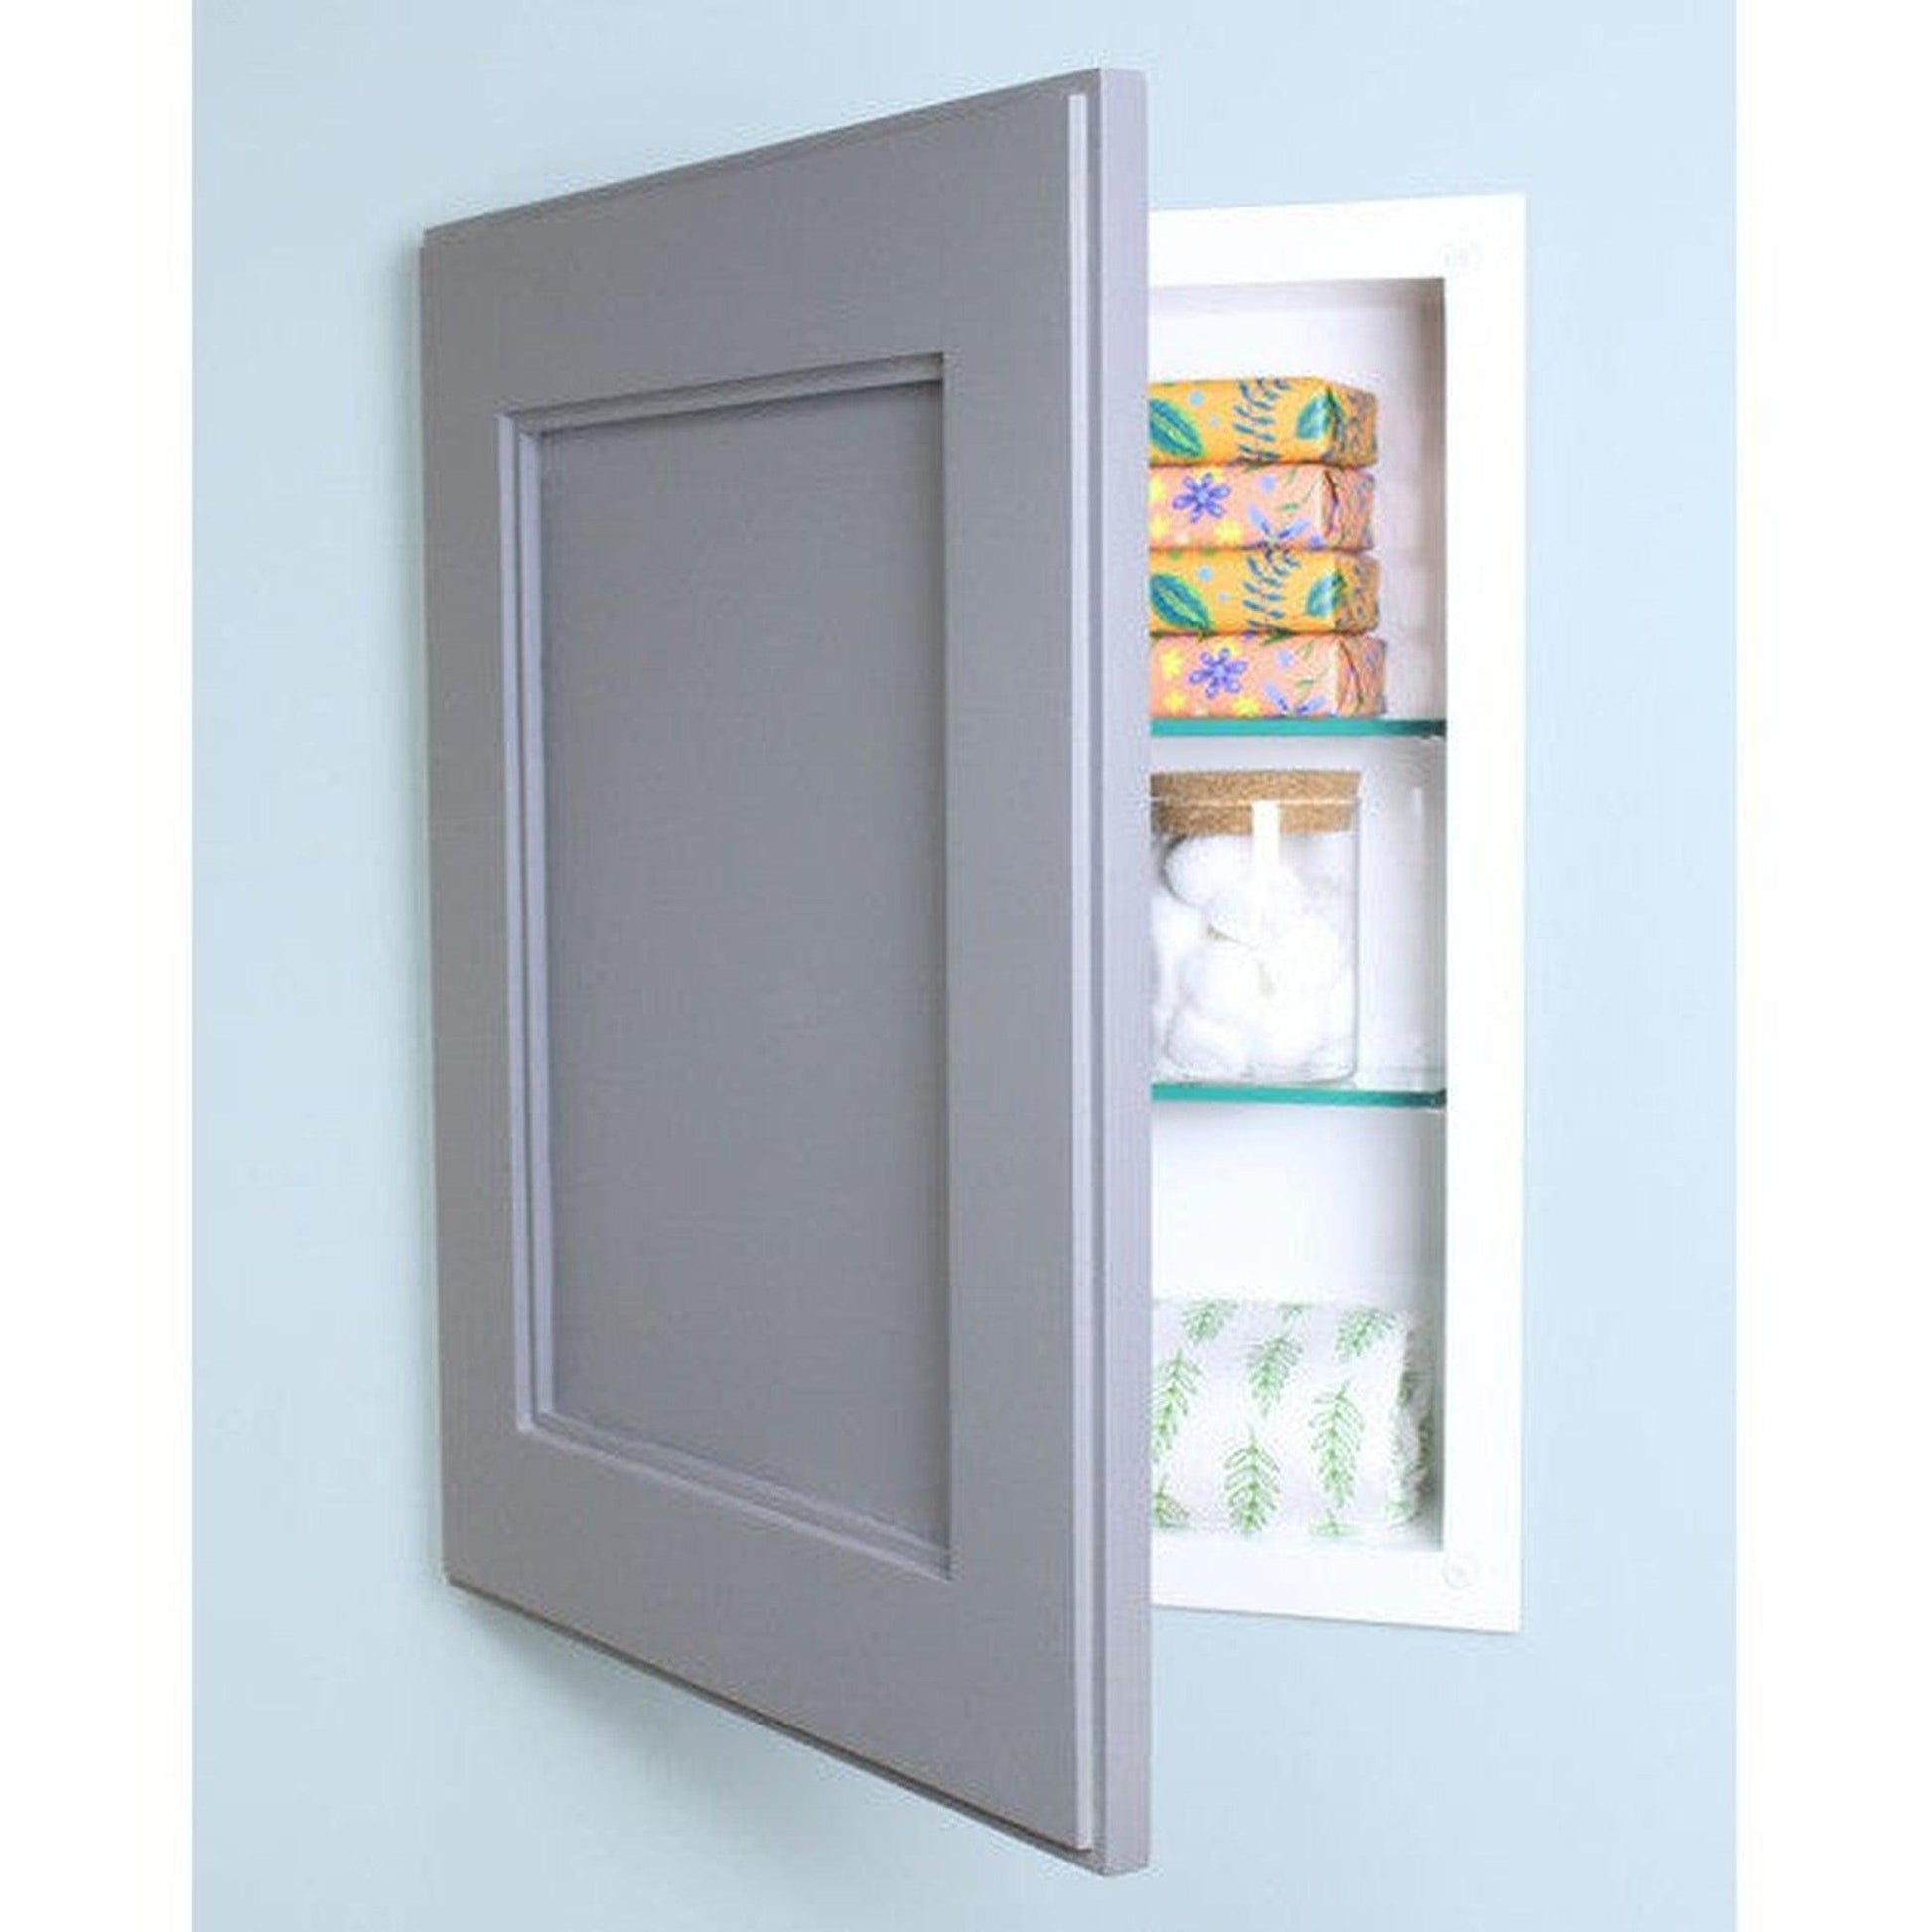 Fox Hollow Furnishings 14" x 18" Dark Gray Shaker Style Special 3" Depth White Interior Recessed Medicine Cabinet With Mirror